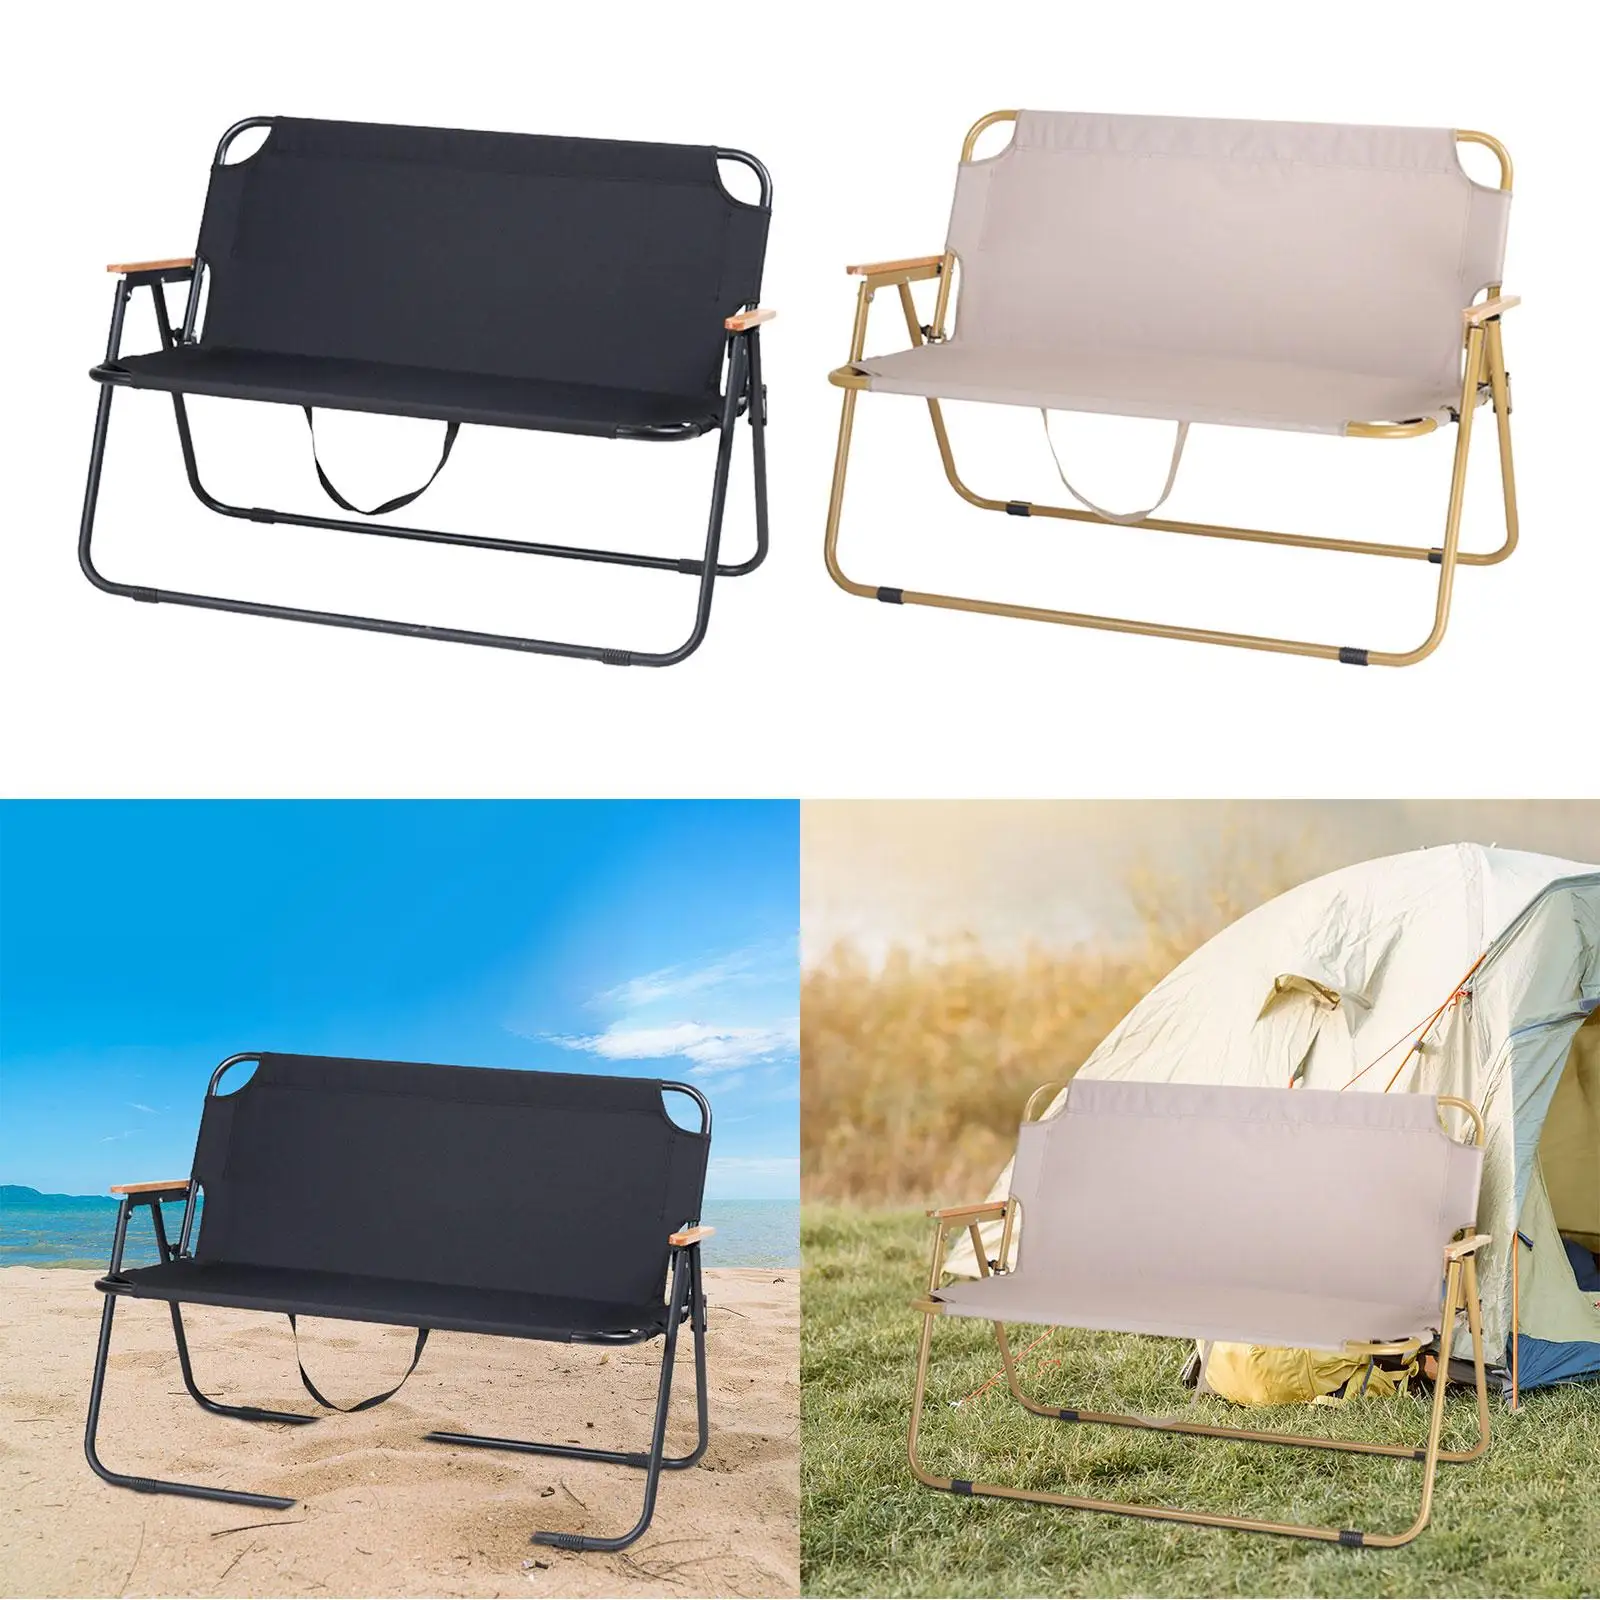 Folding Camping Chair Lightweight Camping Seat Double Chair Outdoor Travel Fishing Camping Stool Chair Camp Chair Beach Chair